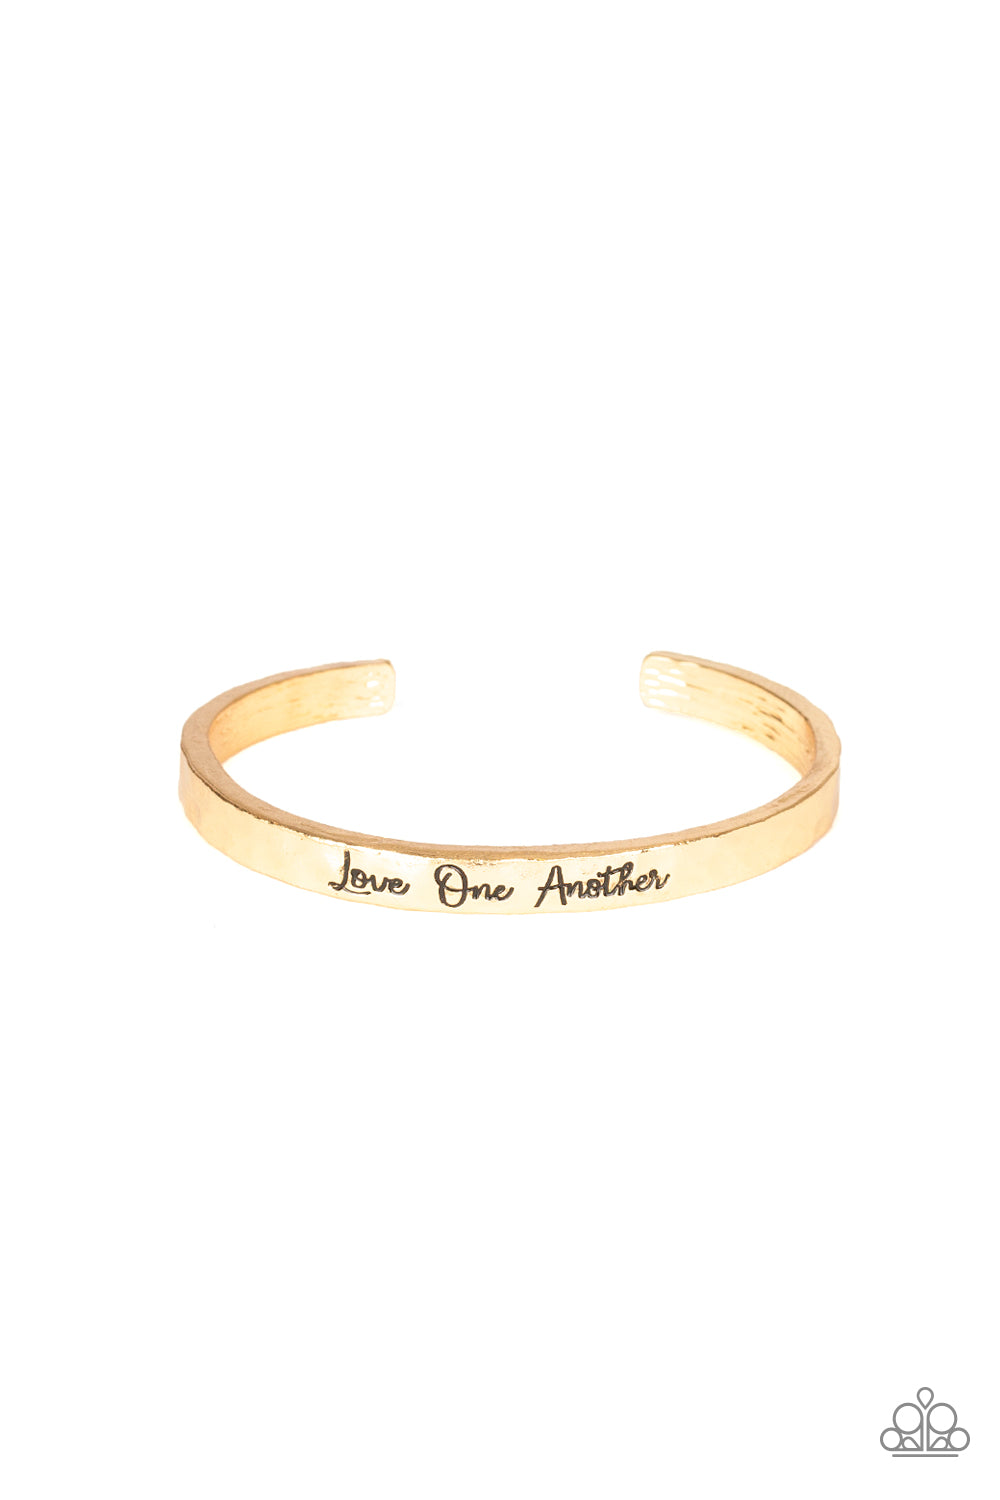 LOVE ONE ANOTHER - GOLD BRACELET